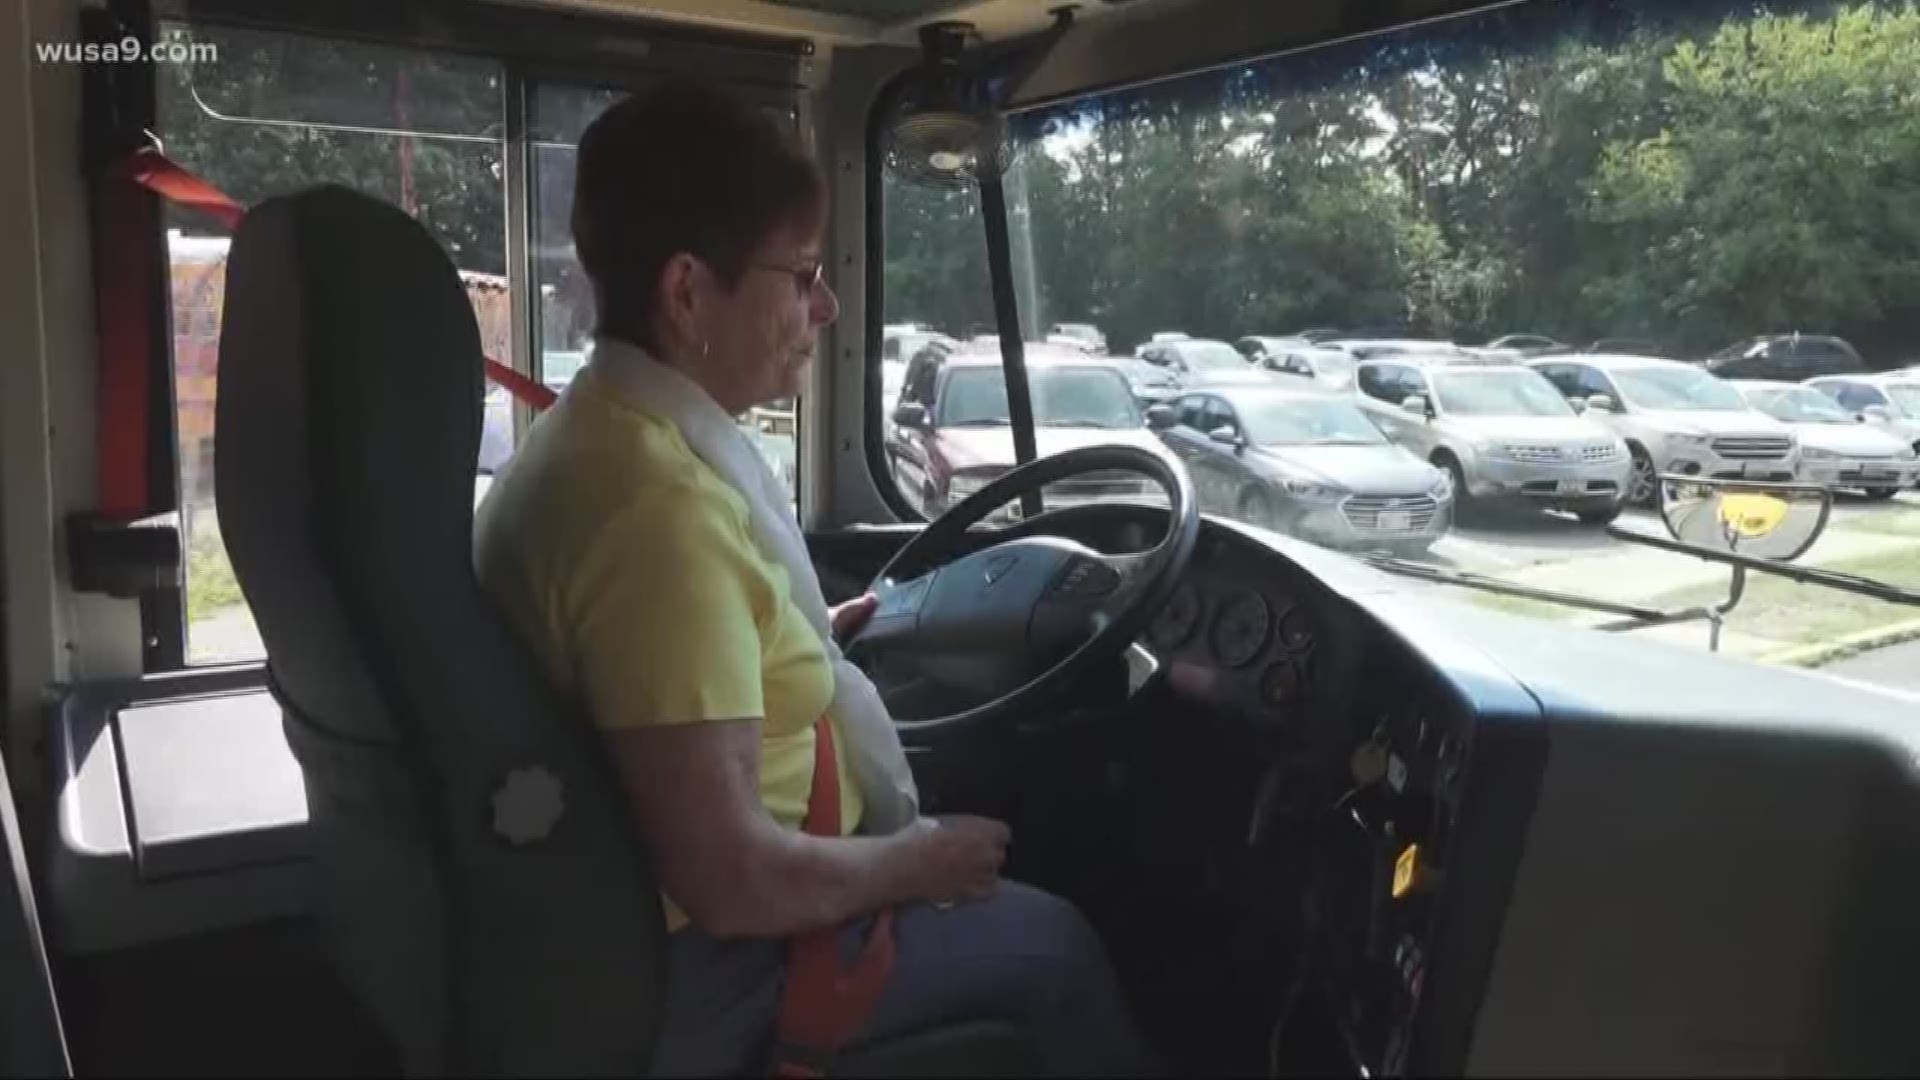 Miss Anne Cuddy has been driving school buses out of the Goddard Bus Lot in Greenbelt for nearly five decades. She's not the oldest bus driver in Prince George's County, but she has been doing it the longest.